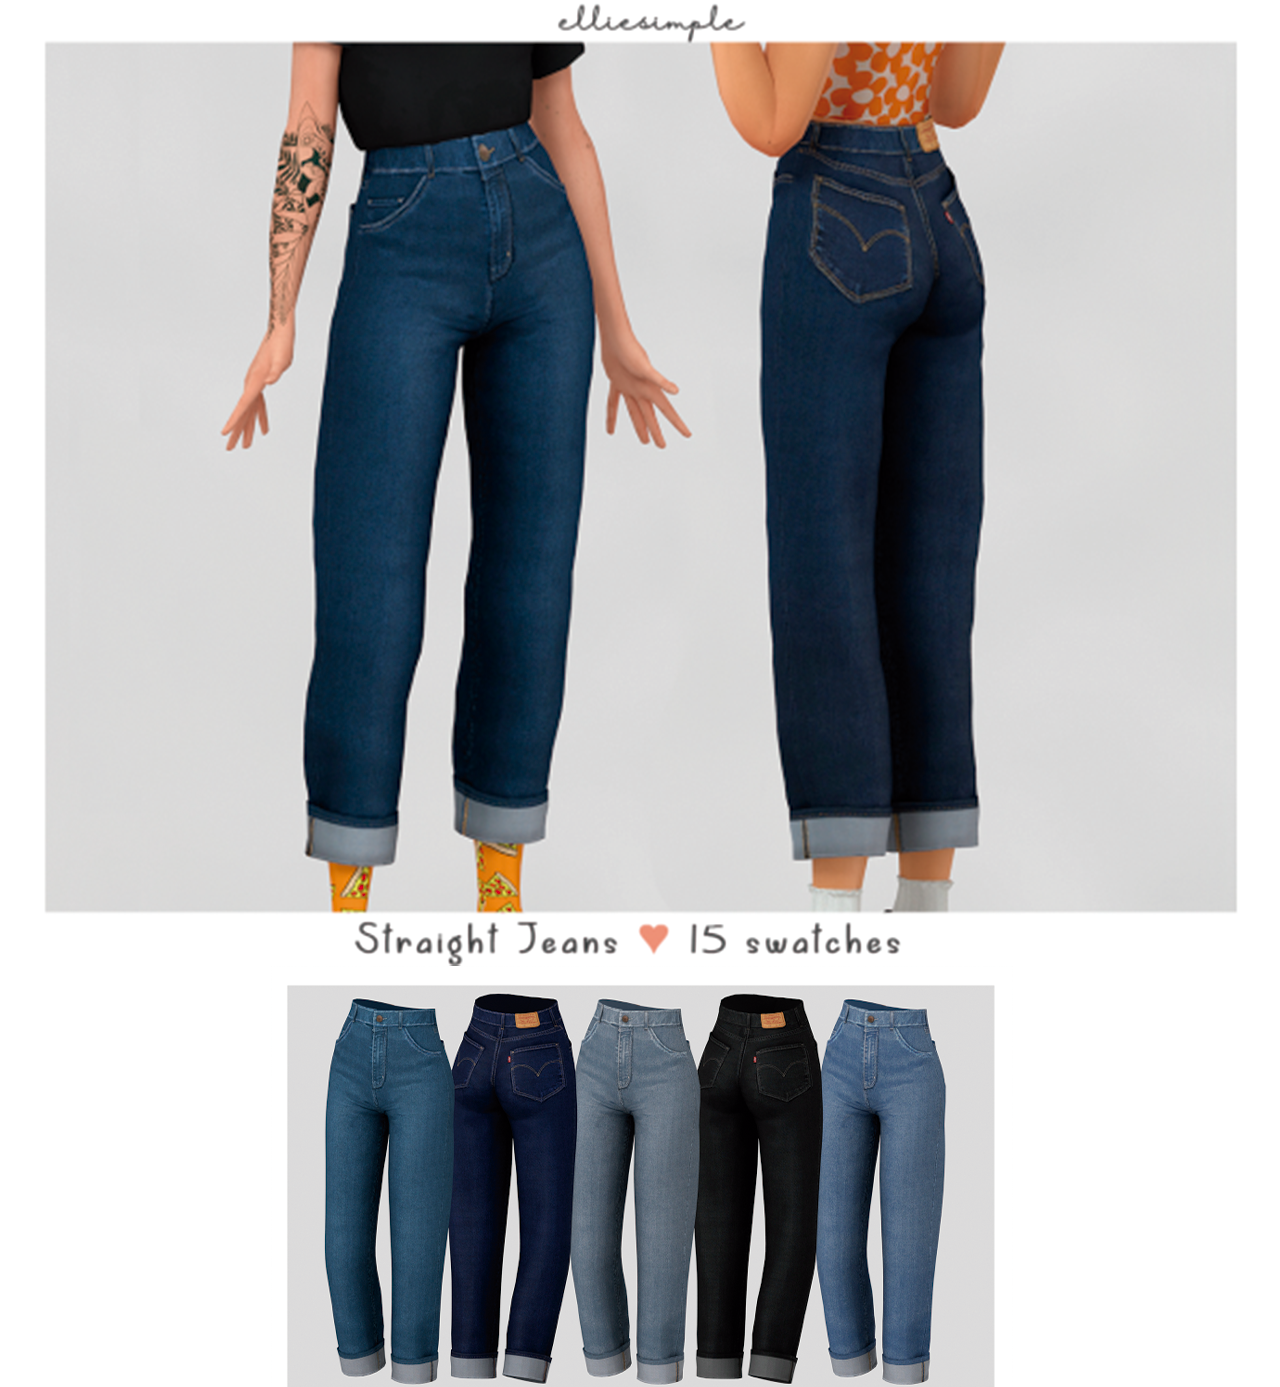 Straight Jeans+ dl by simscastt on DeviantArt